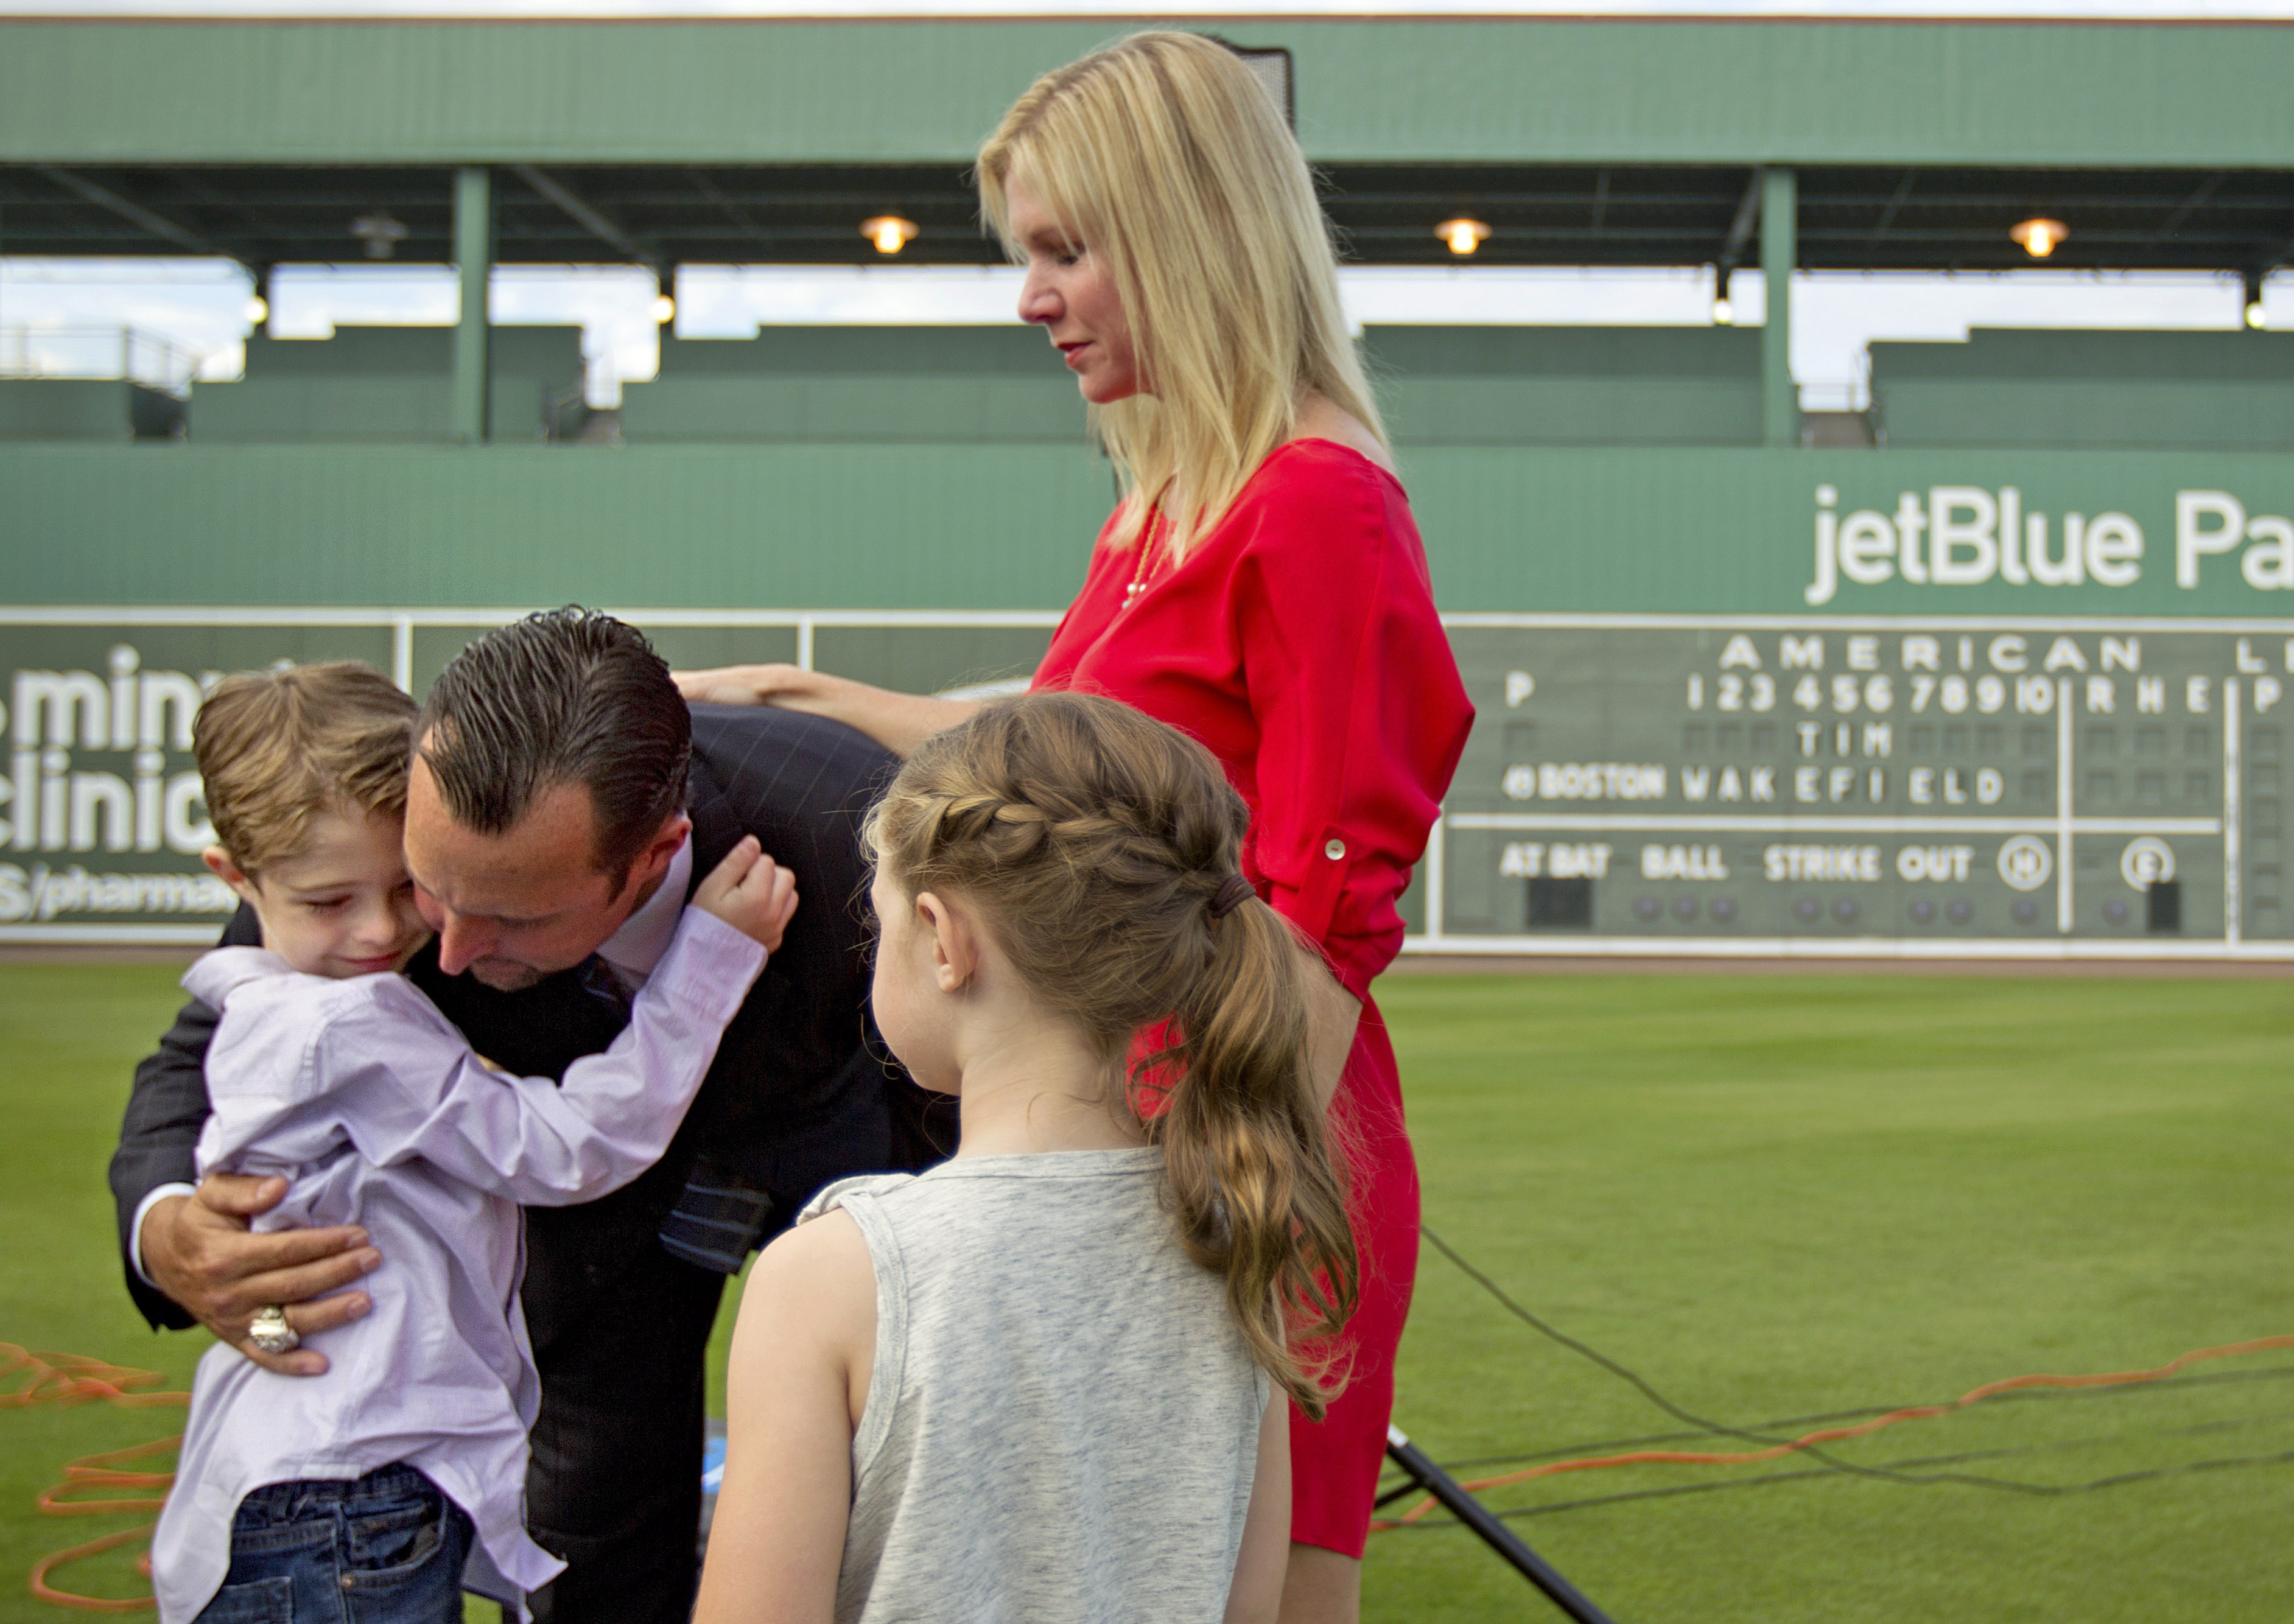 FILE - Boston Red Sox pitcher Tim Wakefield, center left, hugs his son, Trevor, 7, as his wife, Stacy, right, and daughter, Brianna, 6, look on after Wakefield announced his retirement from baseball during a news conference, Friday, Feb. 17, 2012, in Fort Myers, Fla. Stacy Wakefield, the widow of former Boston Red Sox pitcher and two-time World Series champion Tim Wakefield, has died. Wakefield's family said in a statement released through the Red Sox that she died Wednesday, Feb. 28, 2024 at her Massachusetts home, less than five months after her husband died at the age of 57. (AP Photo/David Goldman, File)